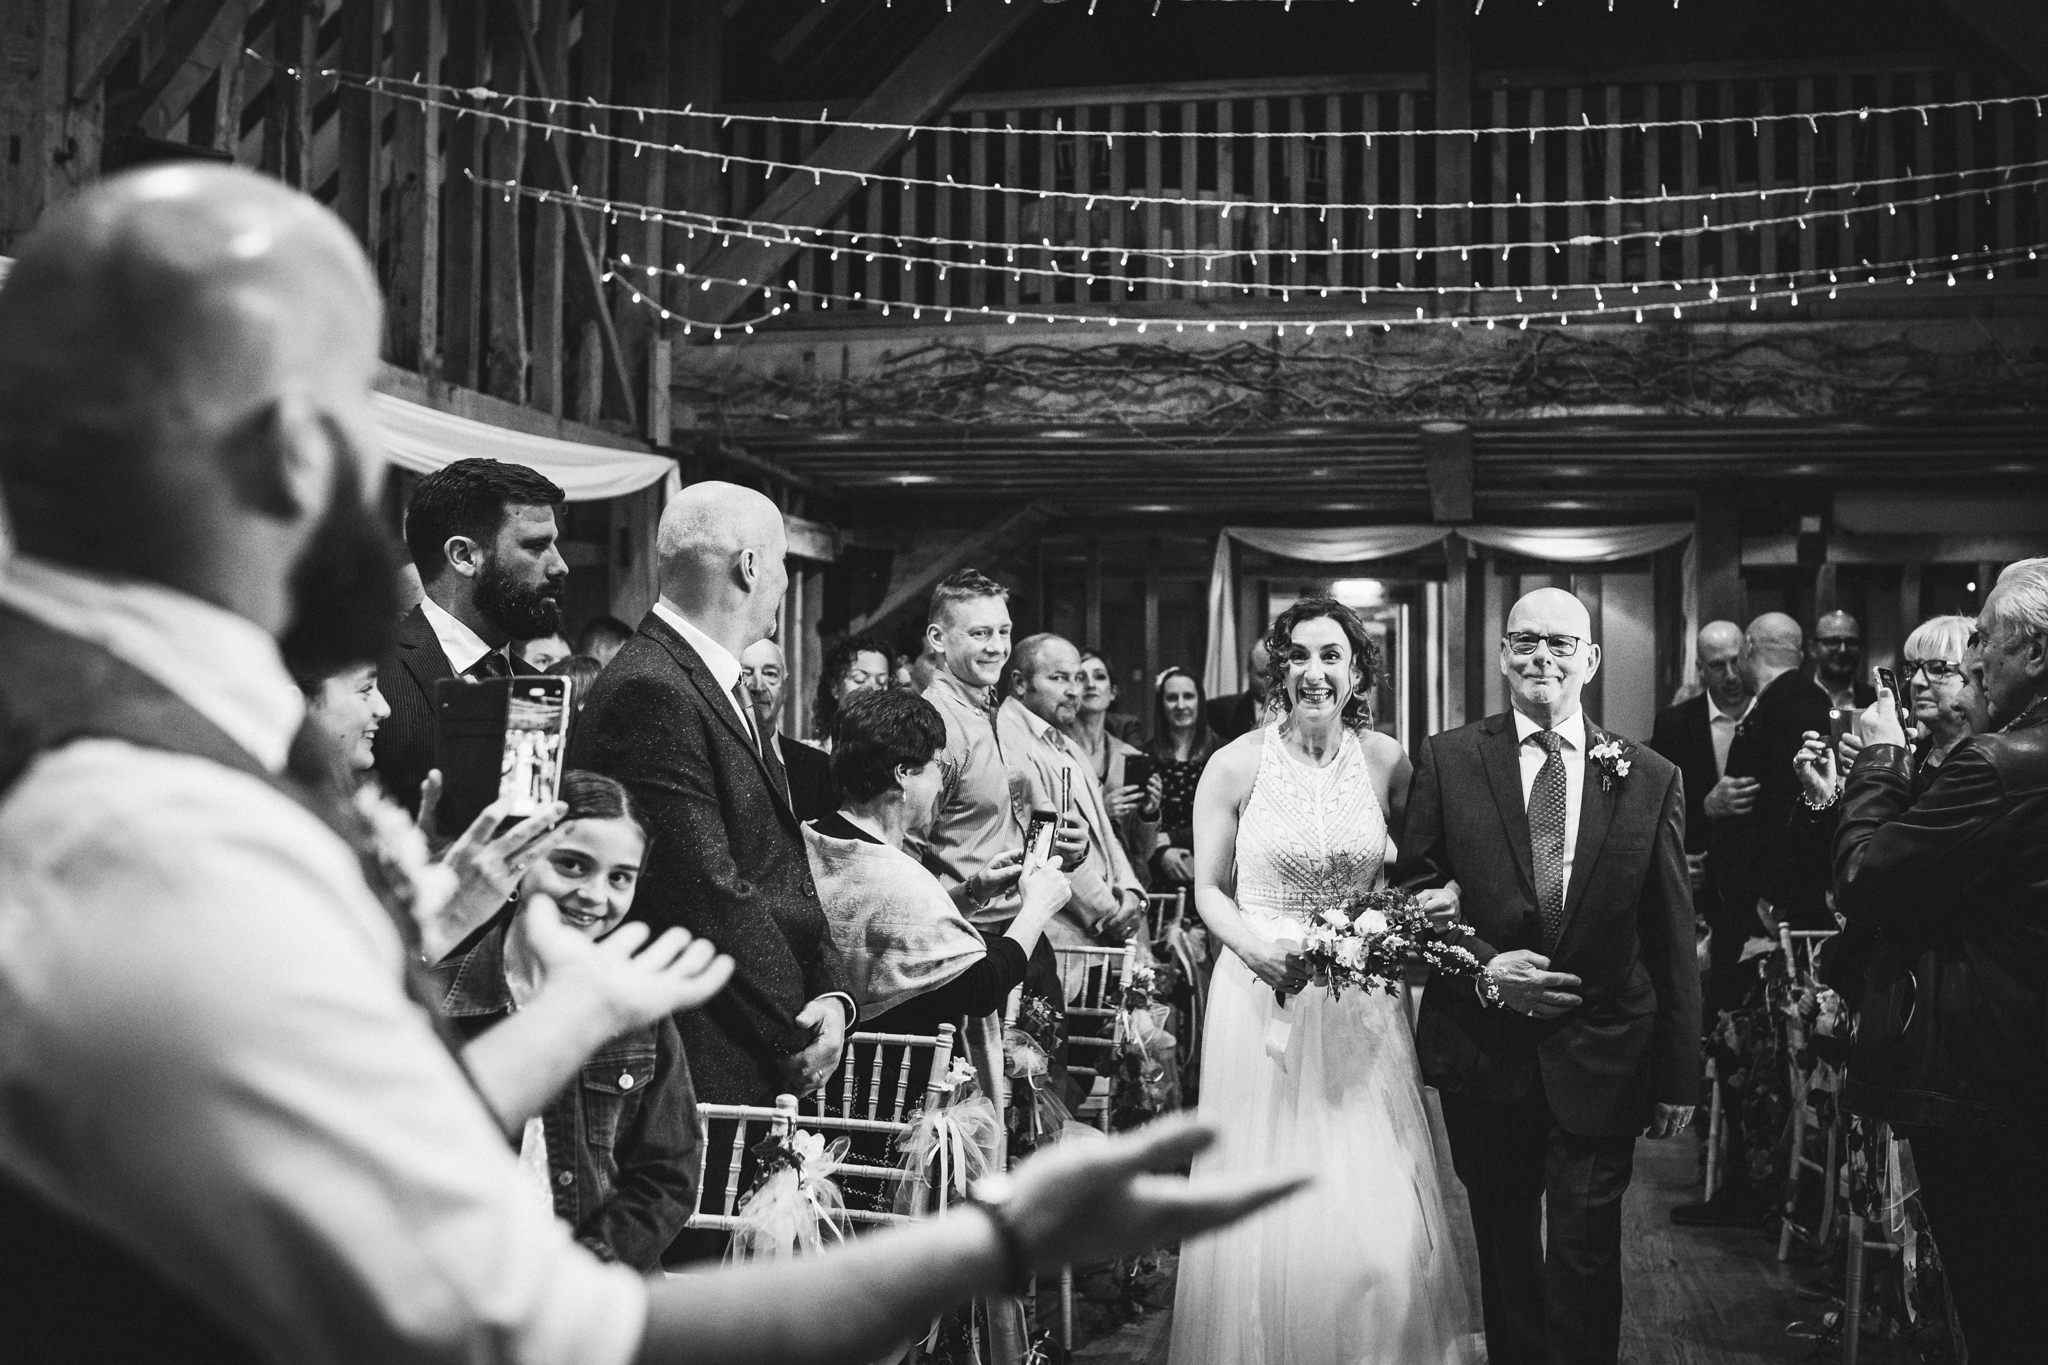 Brides arrival documented in black and white at Hertfordshire wedding ceremony